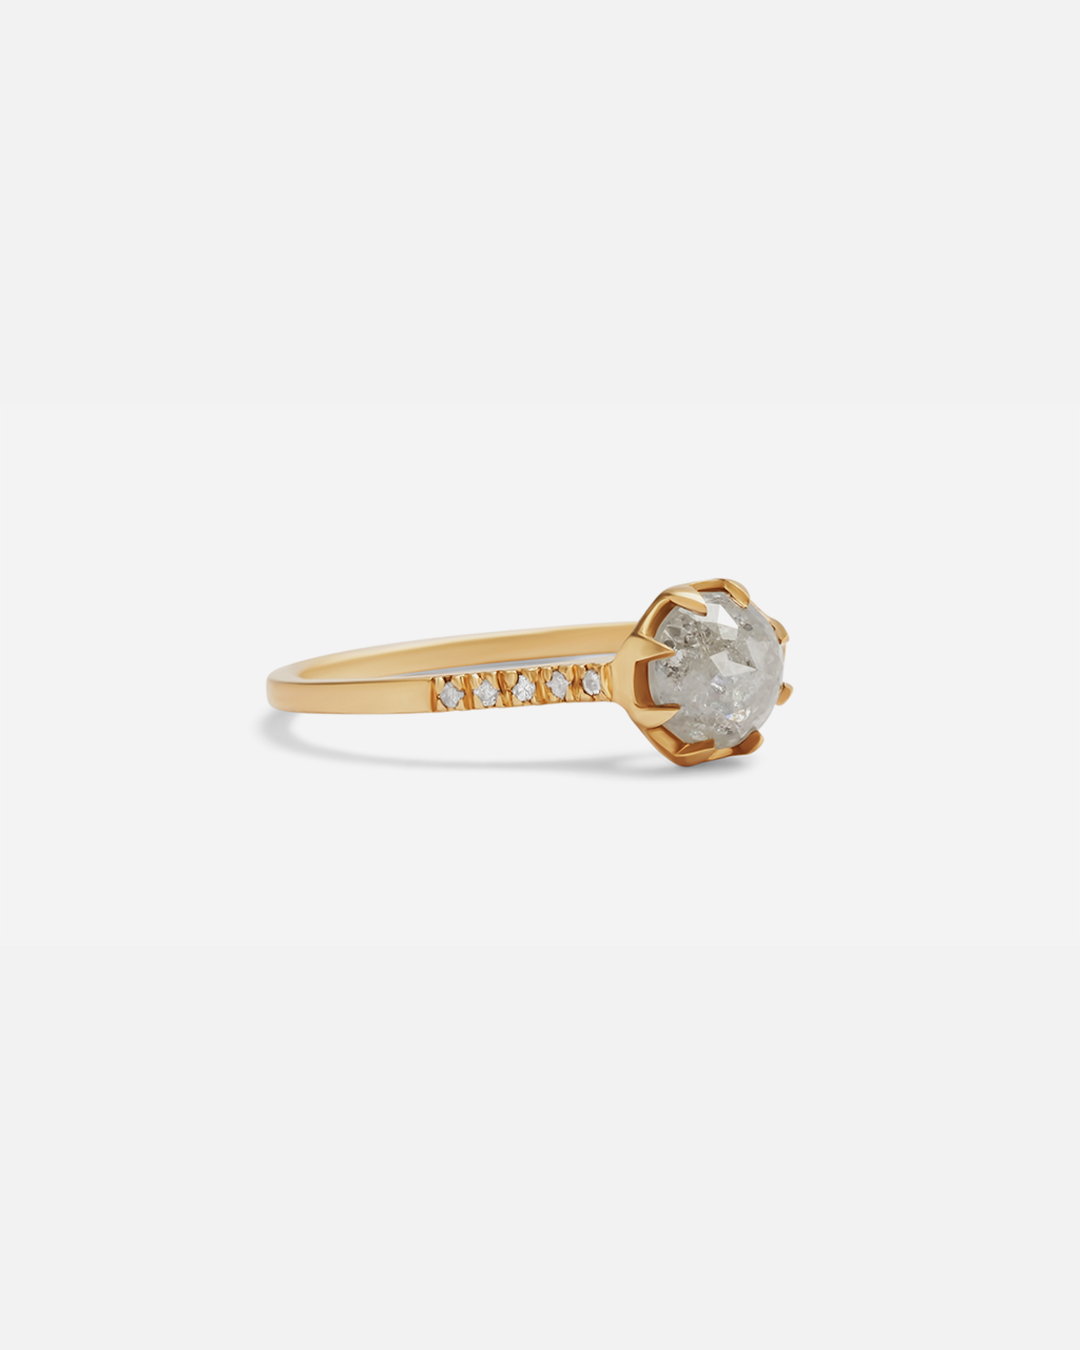 Pave 8 Octagon / Salt + Pepper Diamond + Yellow Gold By fitzgerald jewelry